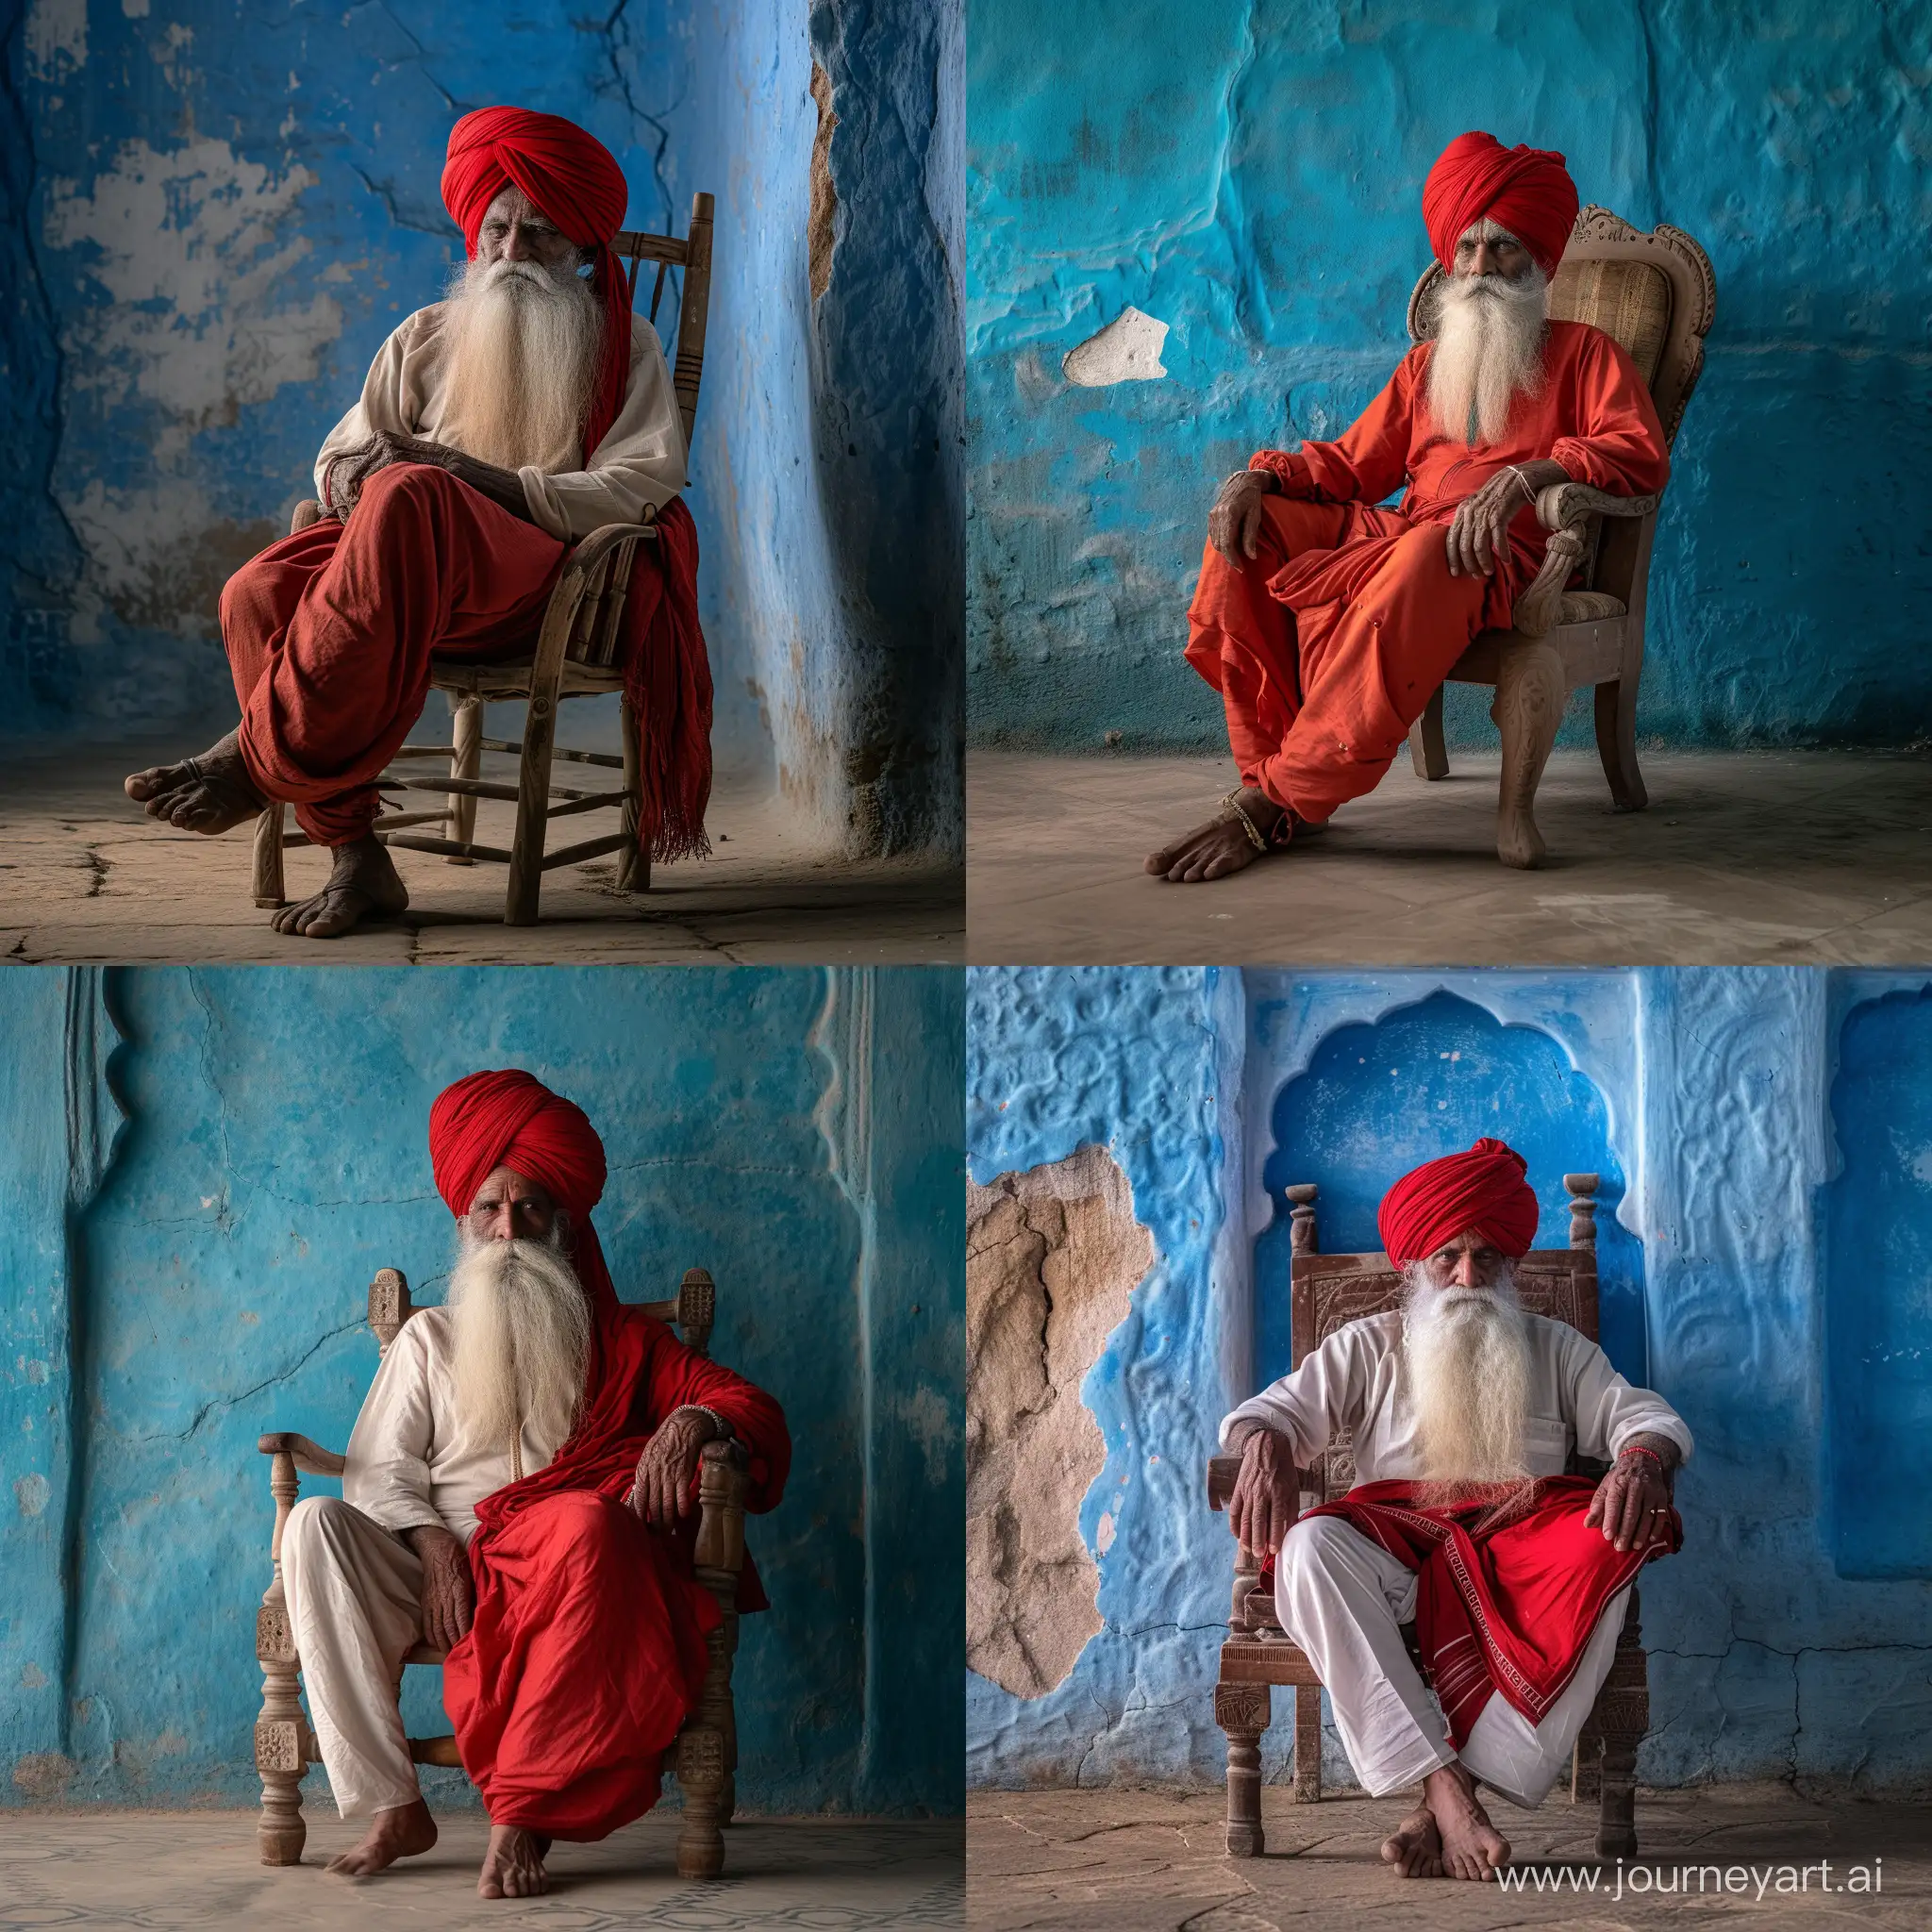 Elderly-Rabari-in-Rajasthan-Portrait-with-Red-Turban-and-White-Beard